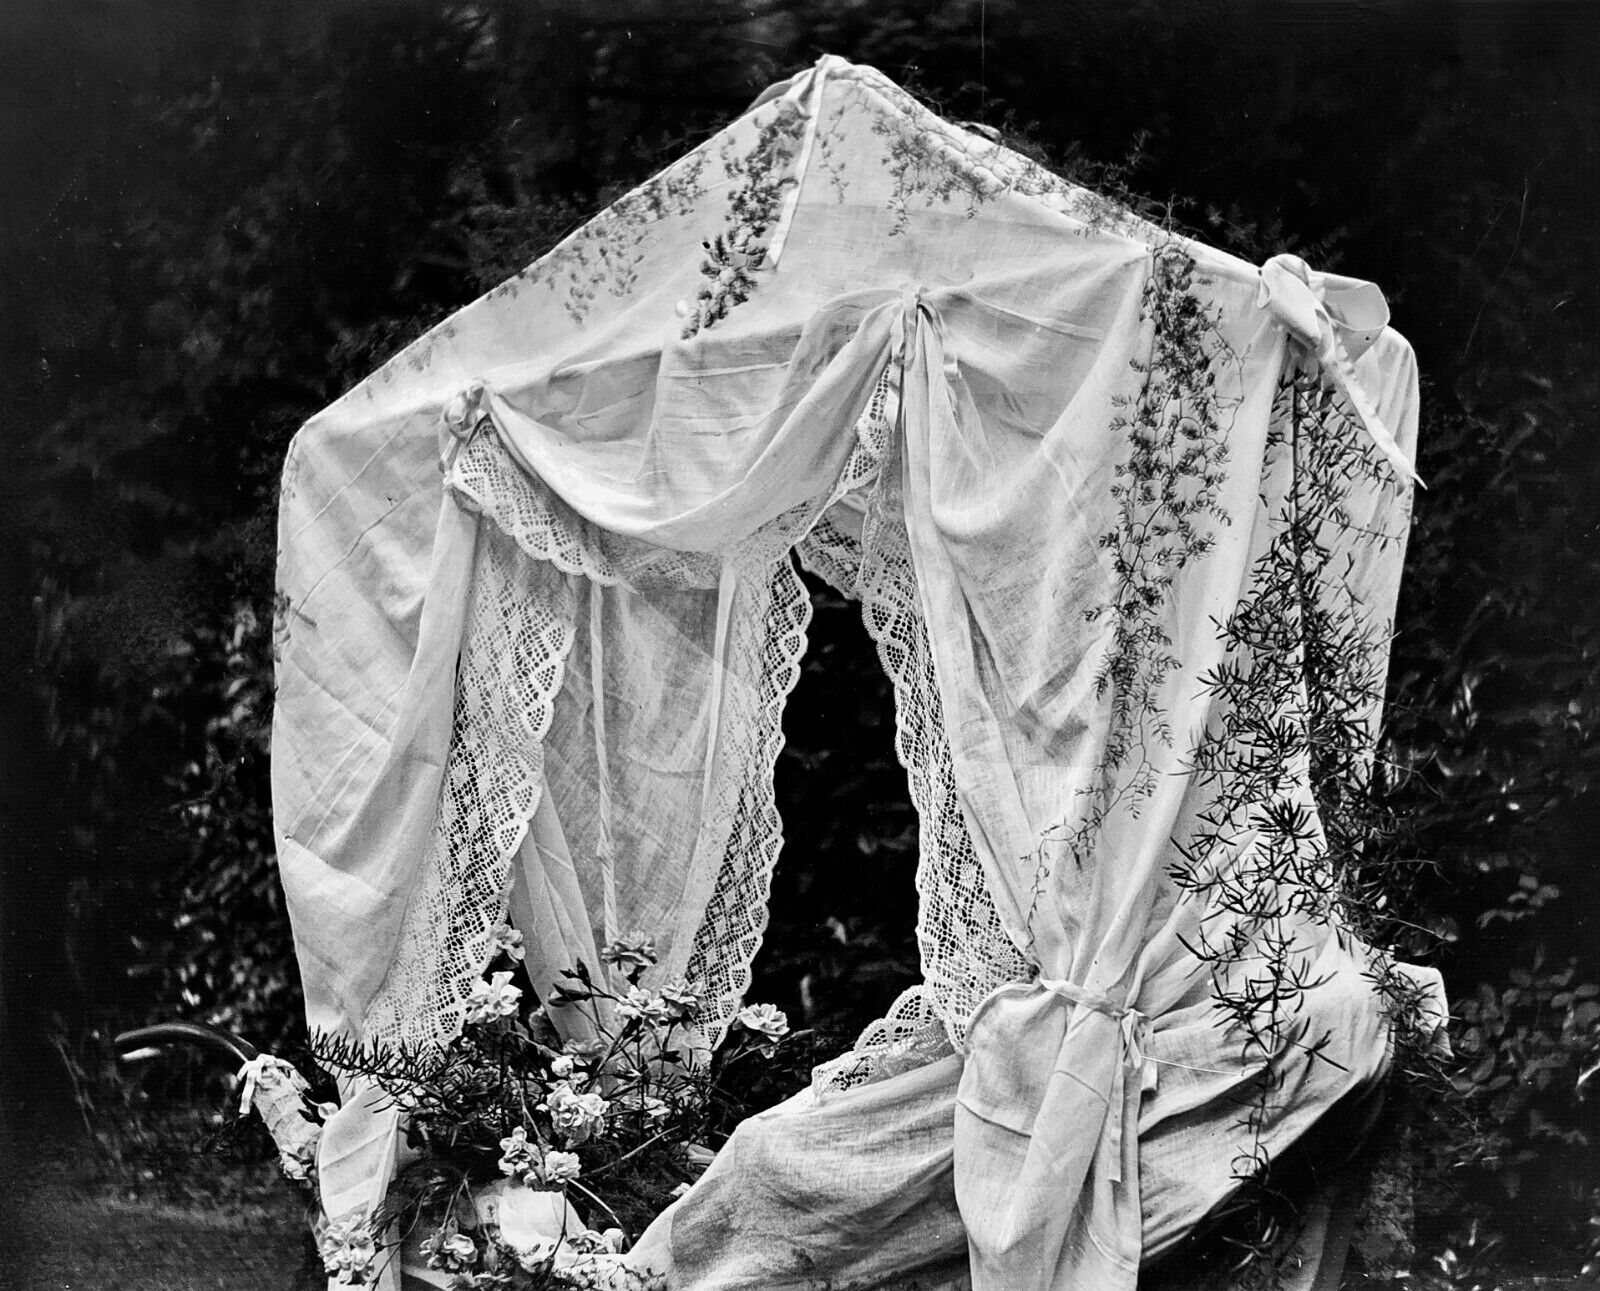 ANTIQUE GLASS PHOTO NEGATIVE - VICTORIAN LACE BABY CARRIAGE CANOPY - 1900\'s